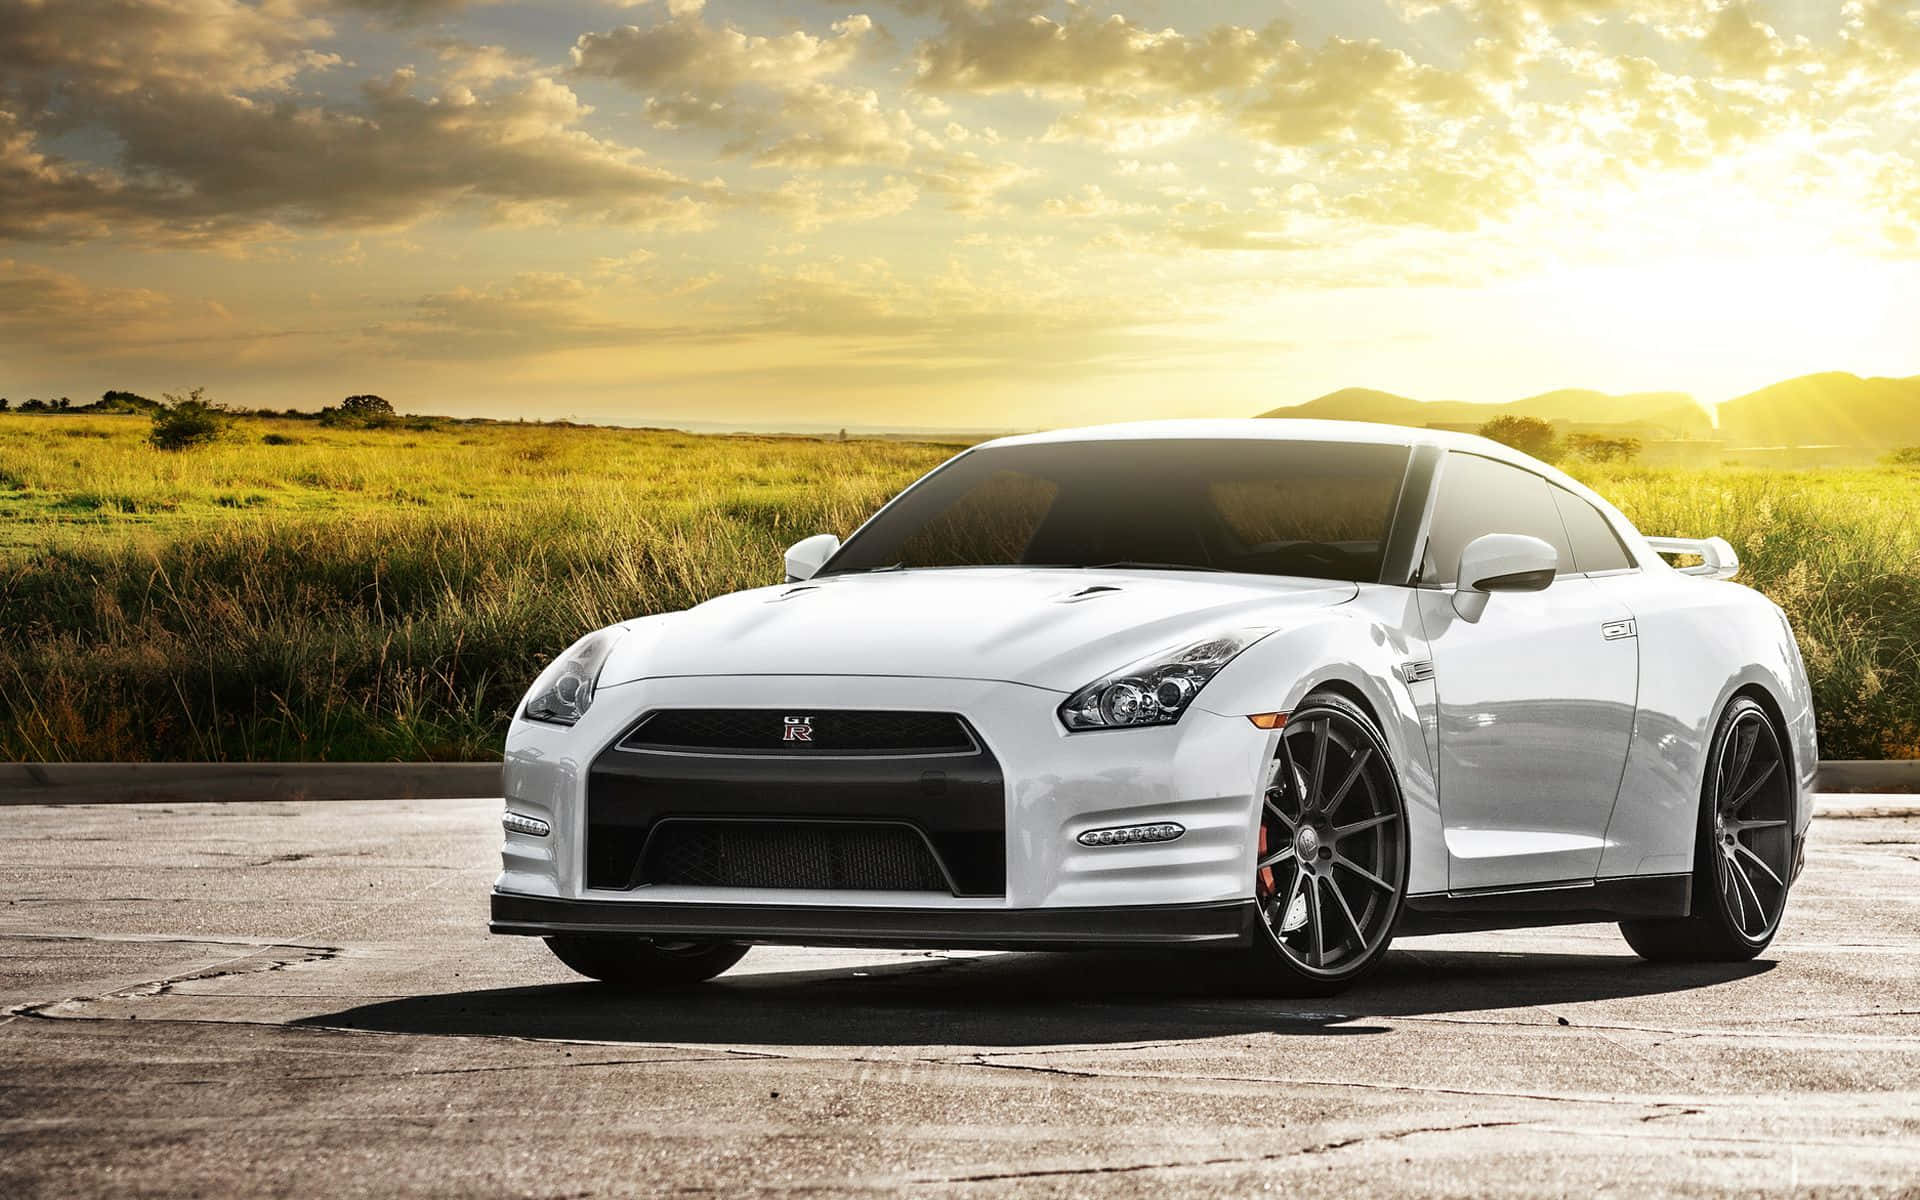 Powerful Performance Of The Cool Gtr